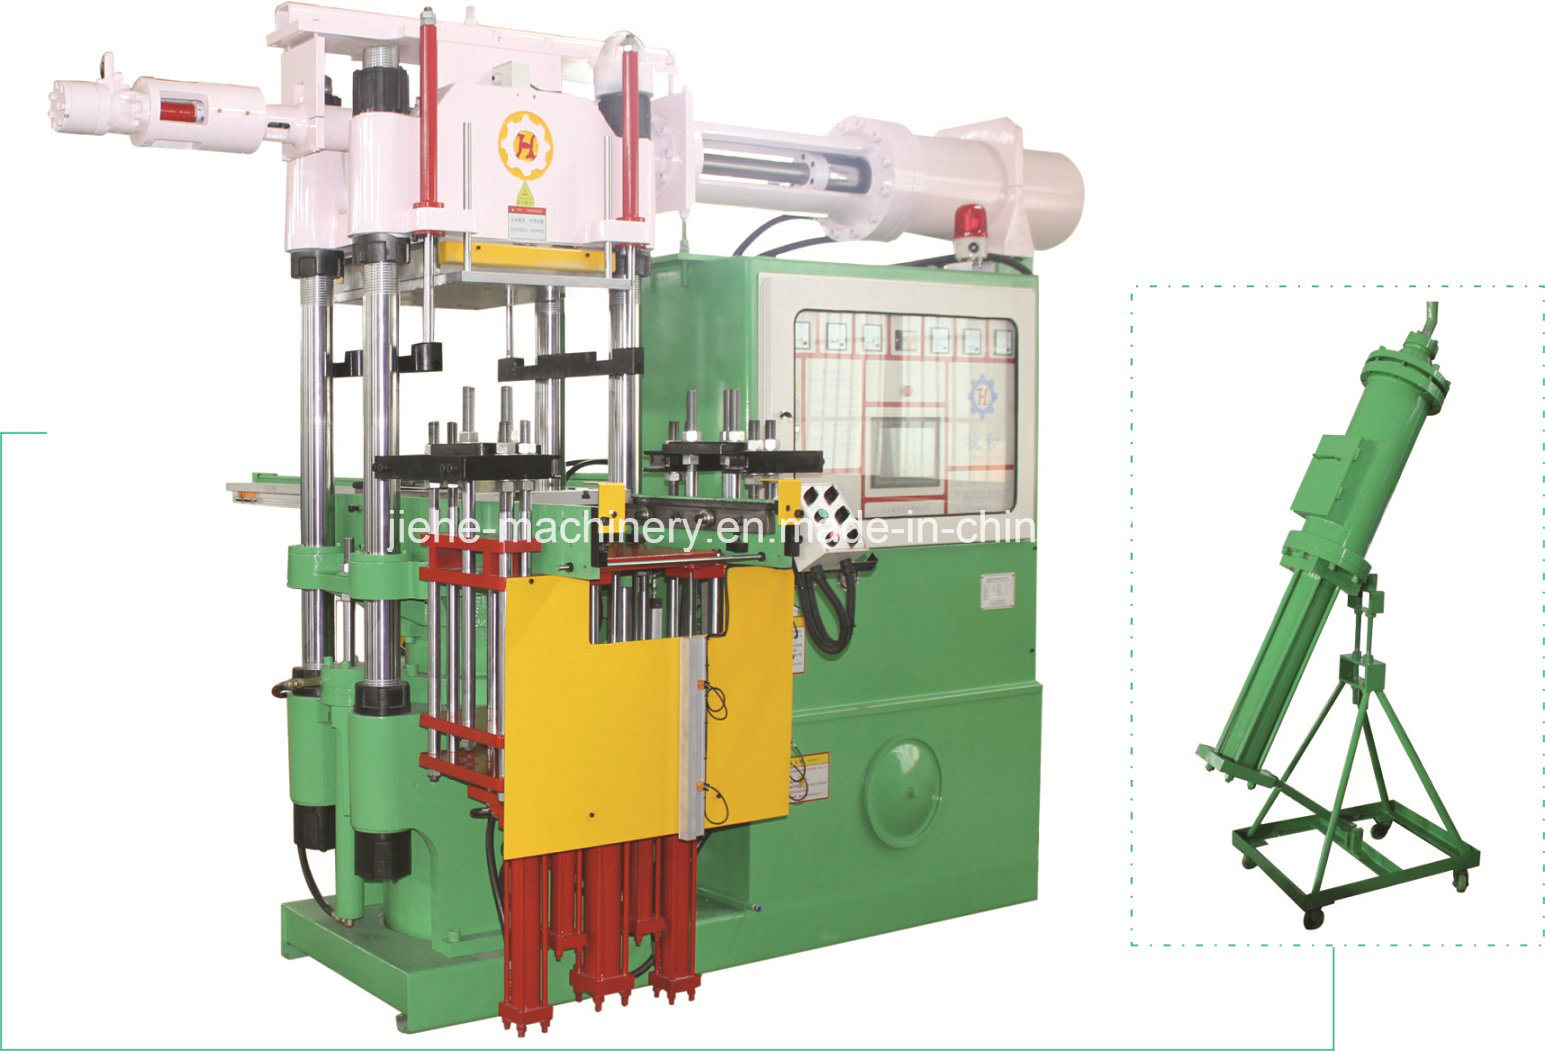 Horizontal Rubber Injection Molding Machine for High Quality Products